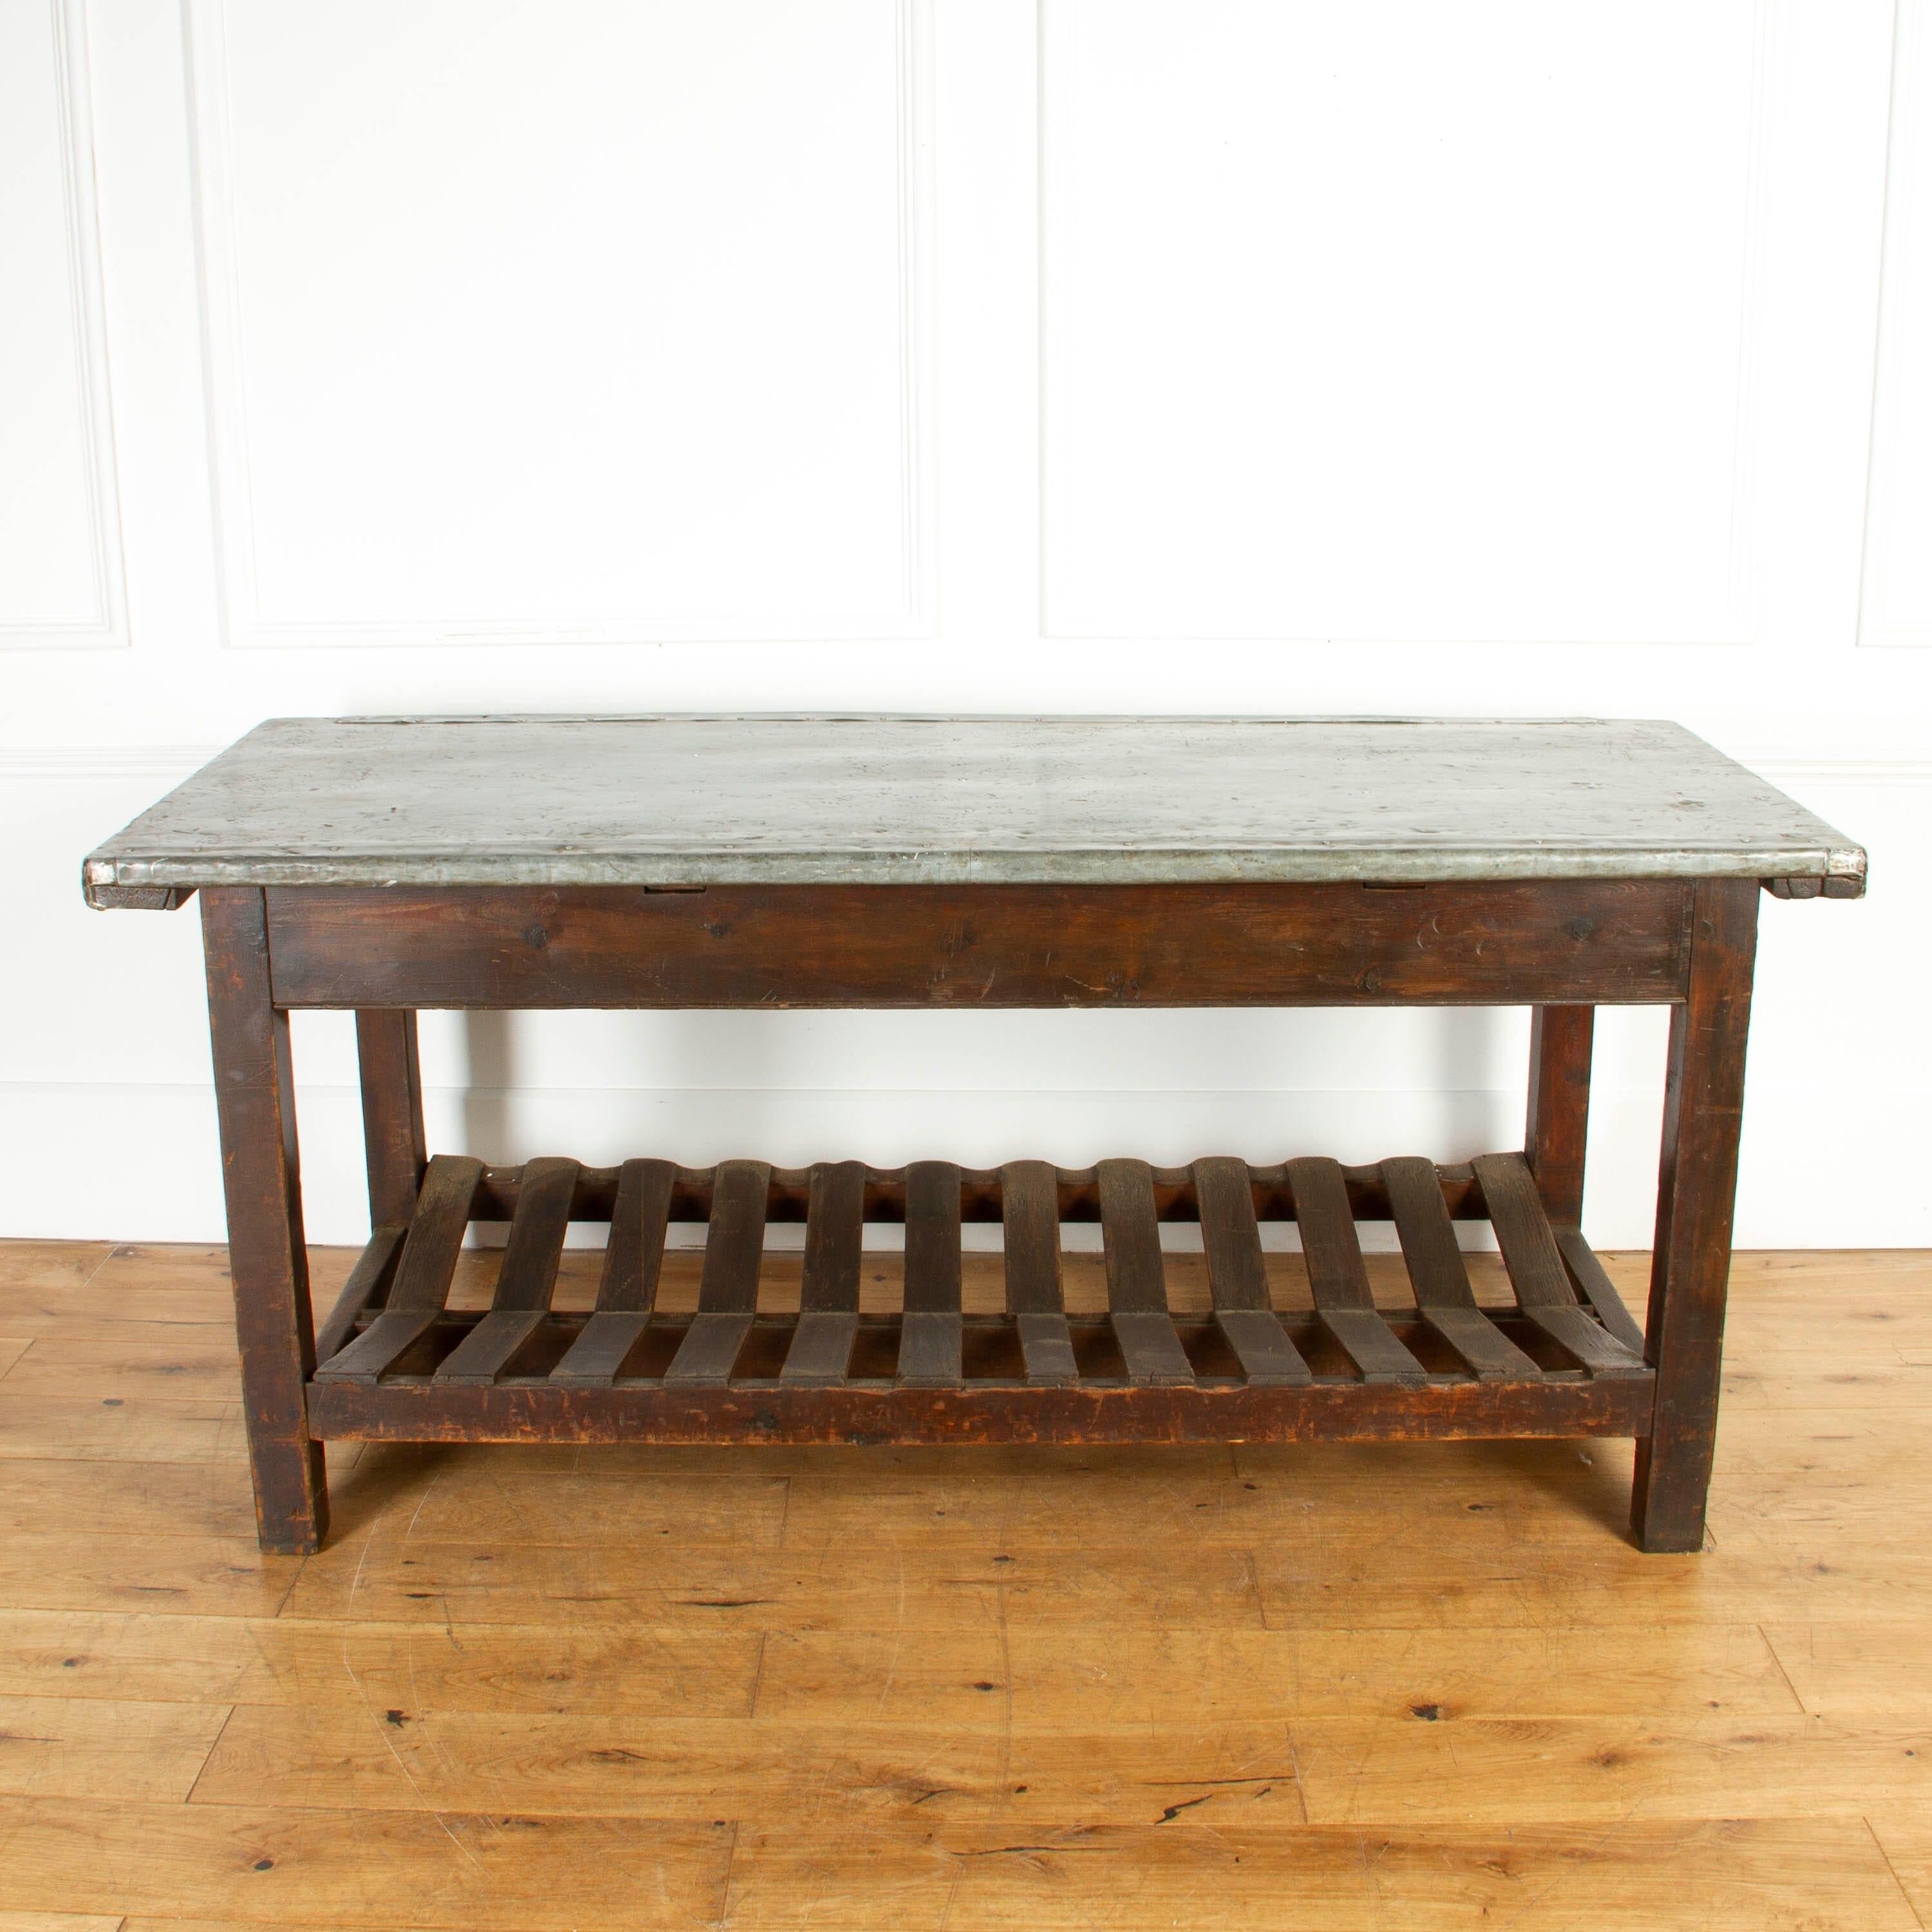 Attractive late 19th century zinc top table, circa 1880.

Originally from Yorkshire, this would have been used as a mending table within a traditional woolen mill. 

It has its original top and structure which are both in fantastic condition.